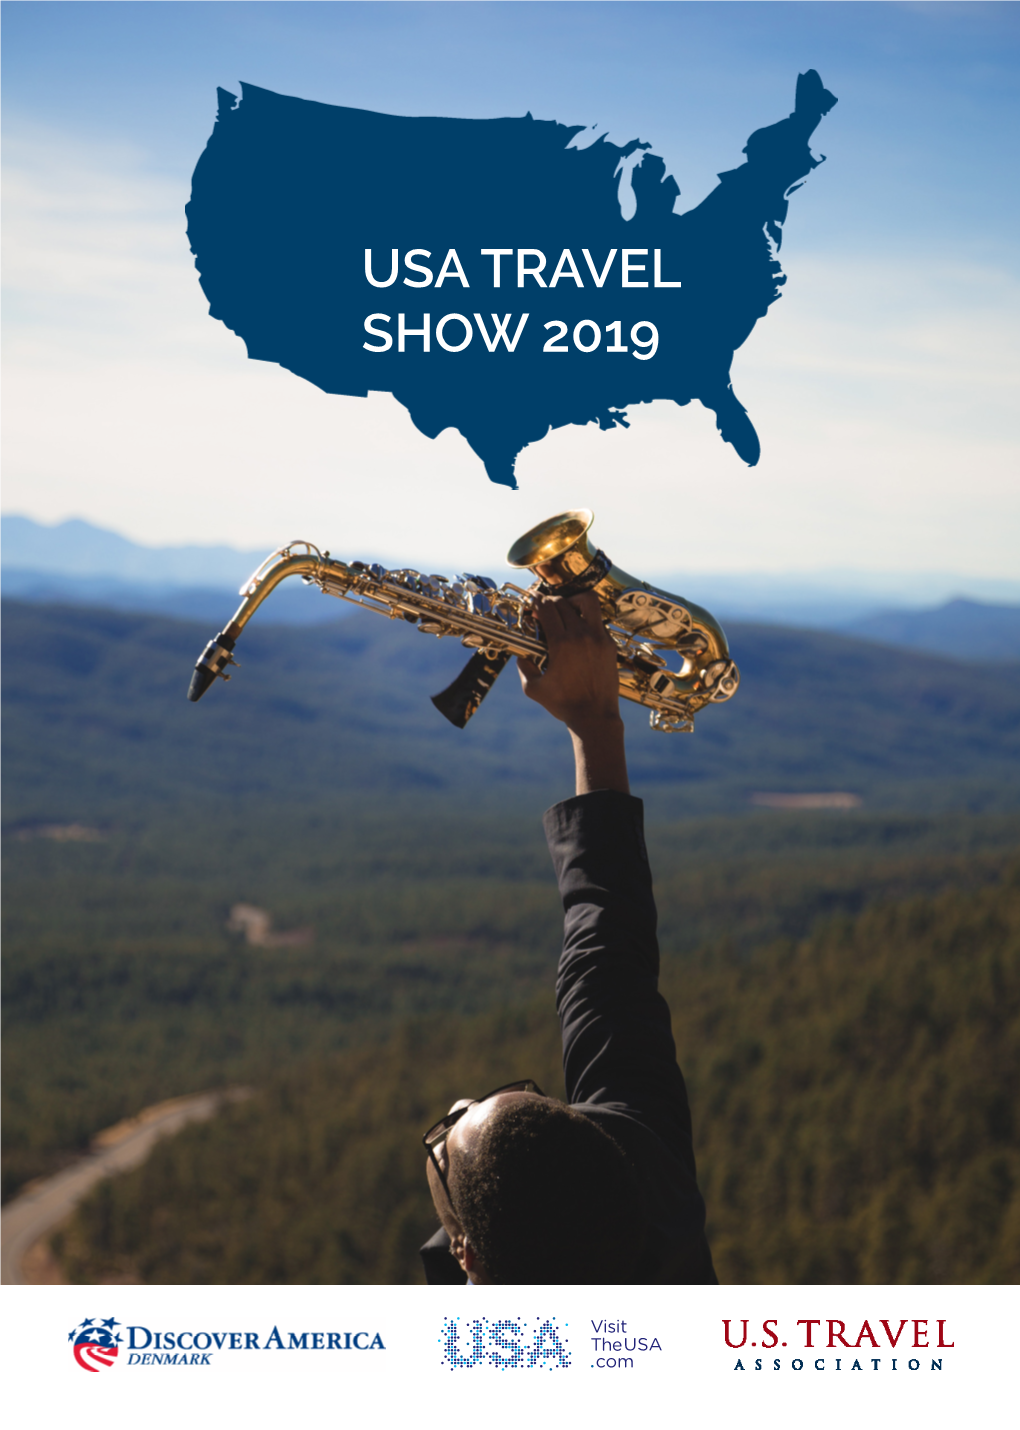 Download Exhibitor Handbook from USA Travel Show 2019